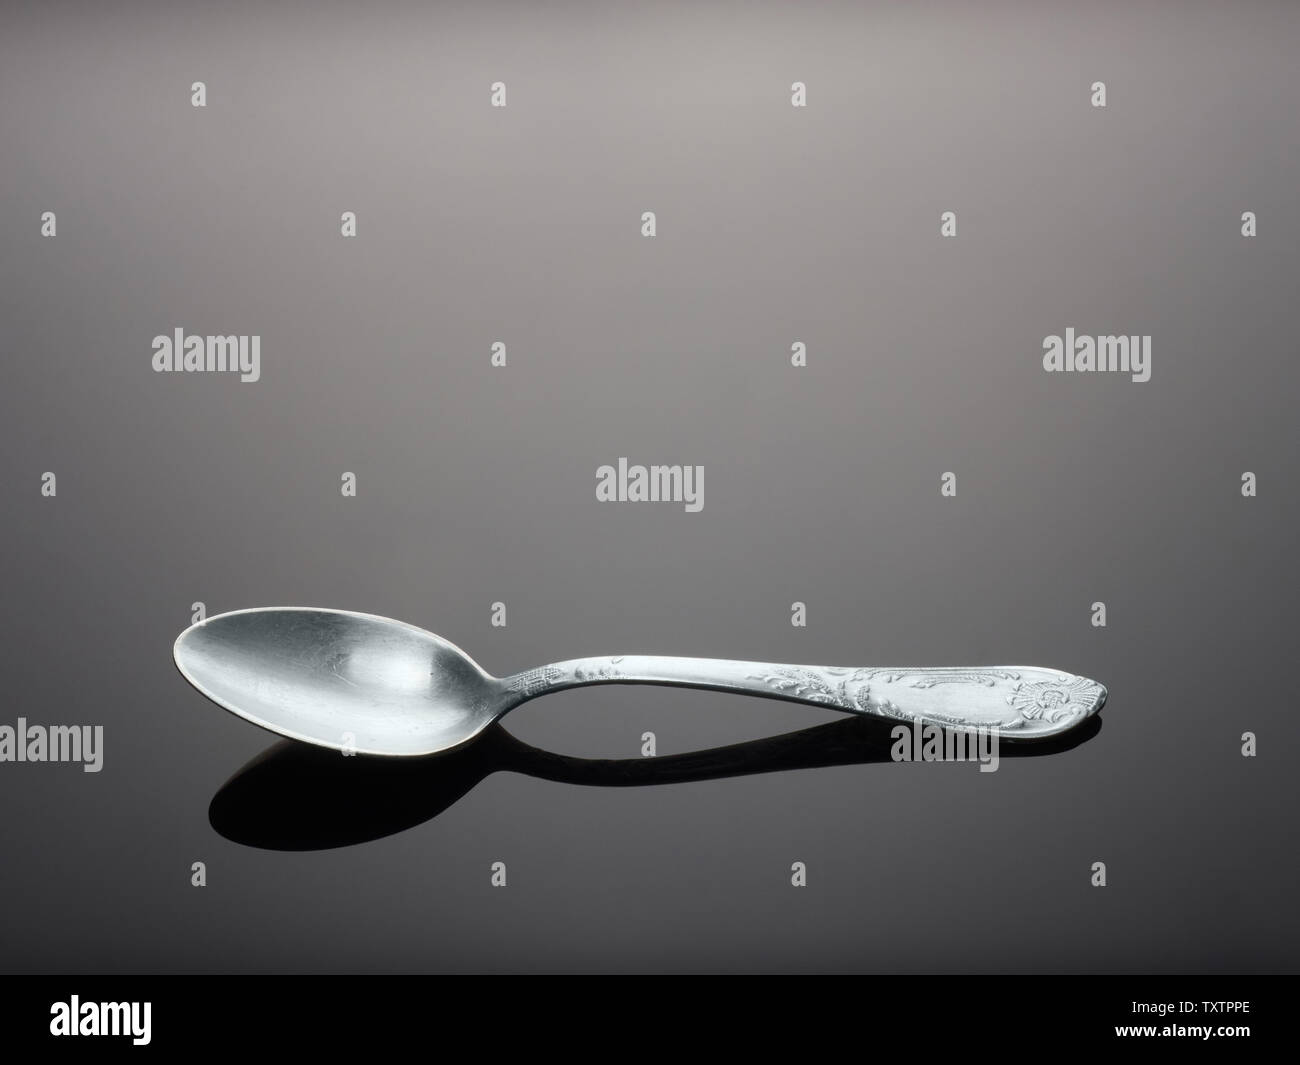 https://c8.alamy.com/comp/TXTPPE/one-upronickel-teaspoon-on-gray-background-with-gradient-and-reflection-TXTPPE.jpg